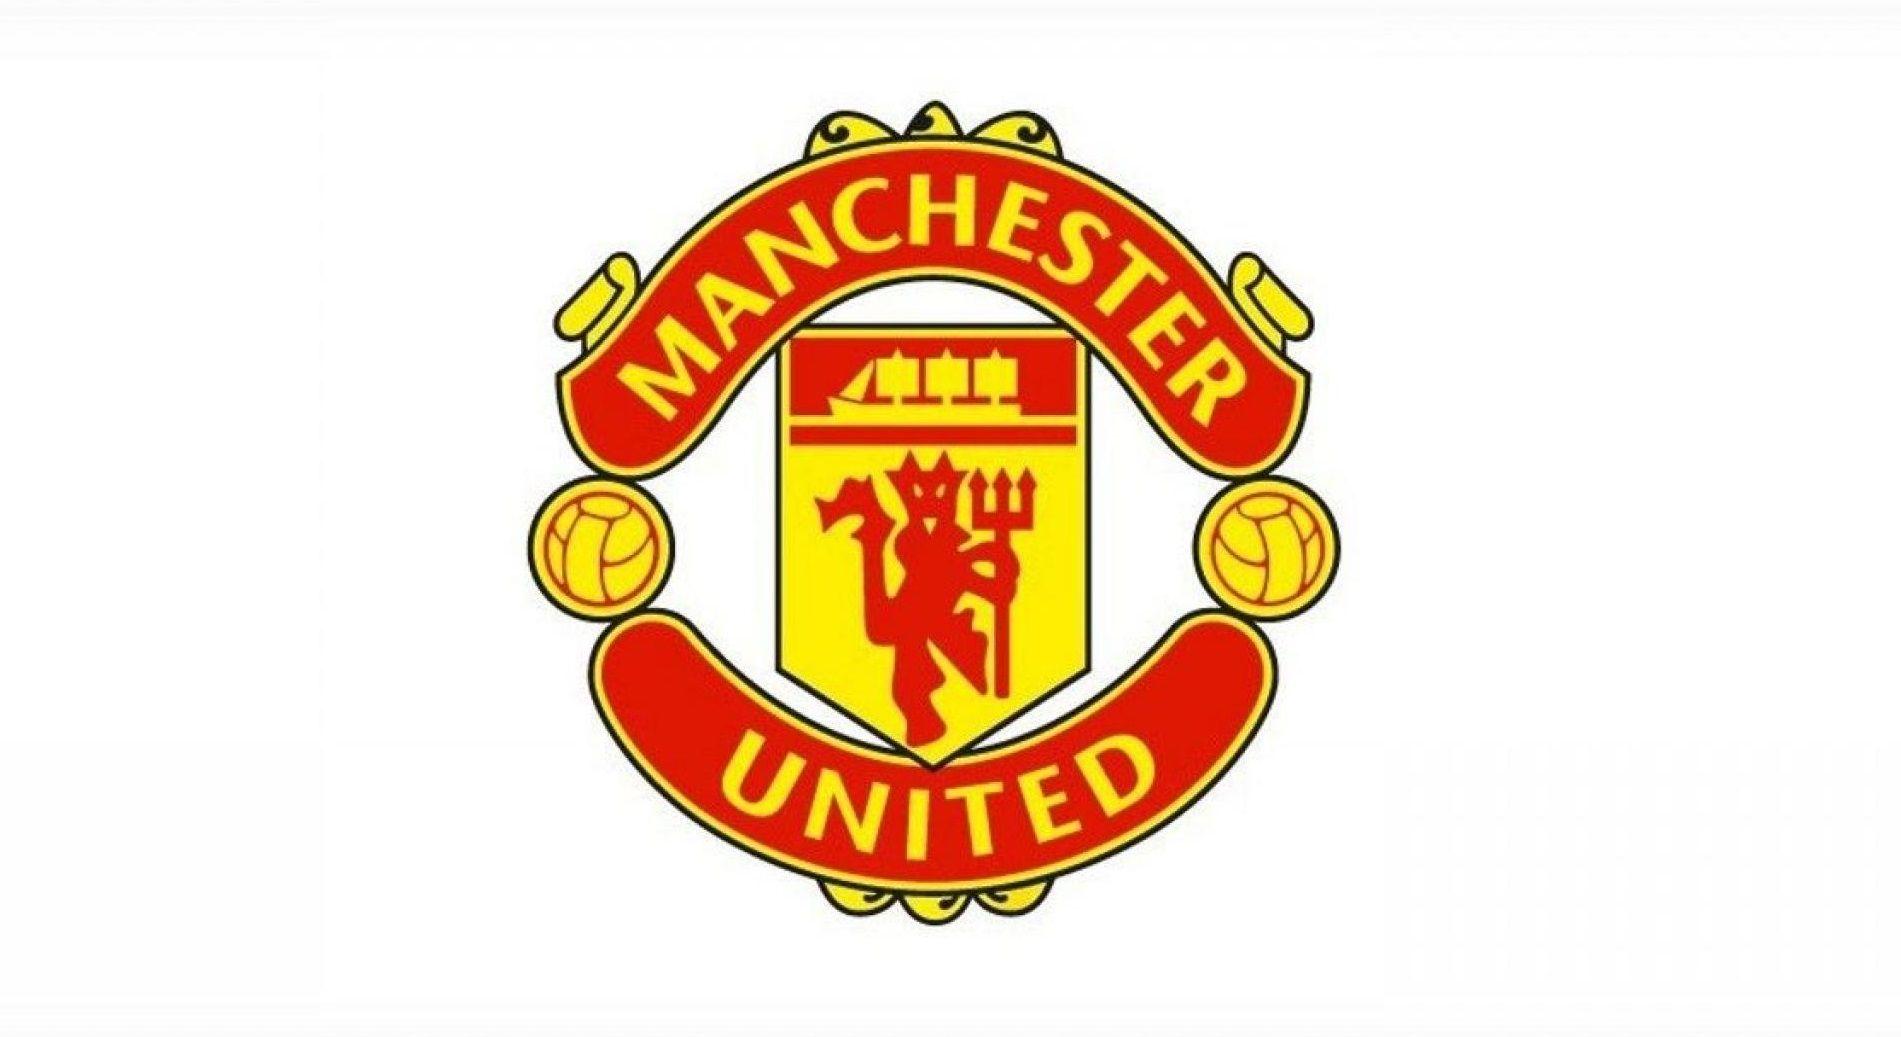 Man U Logo - In picture: The evolution of Manchester United's crest